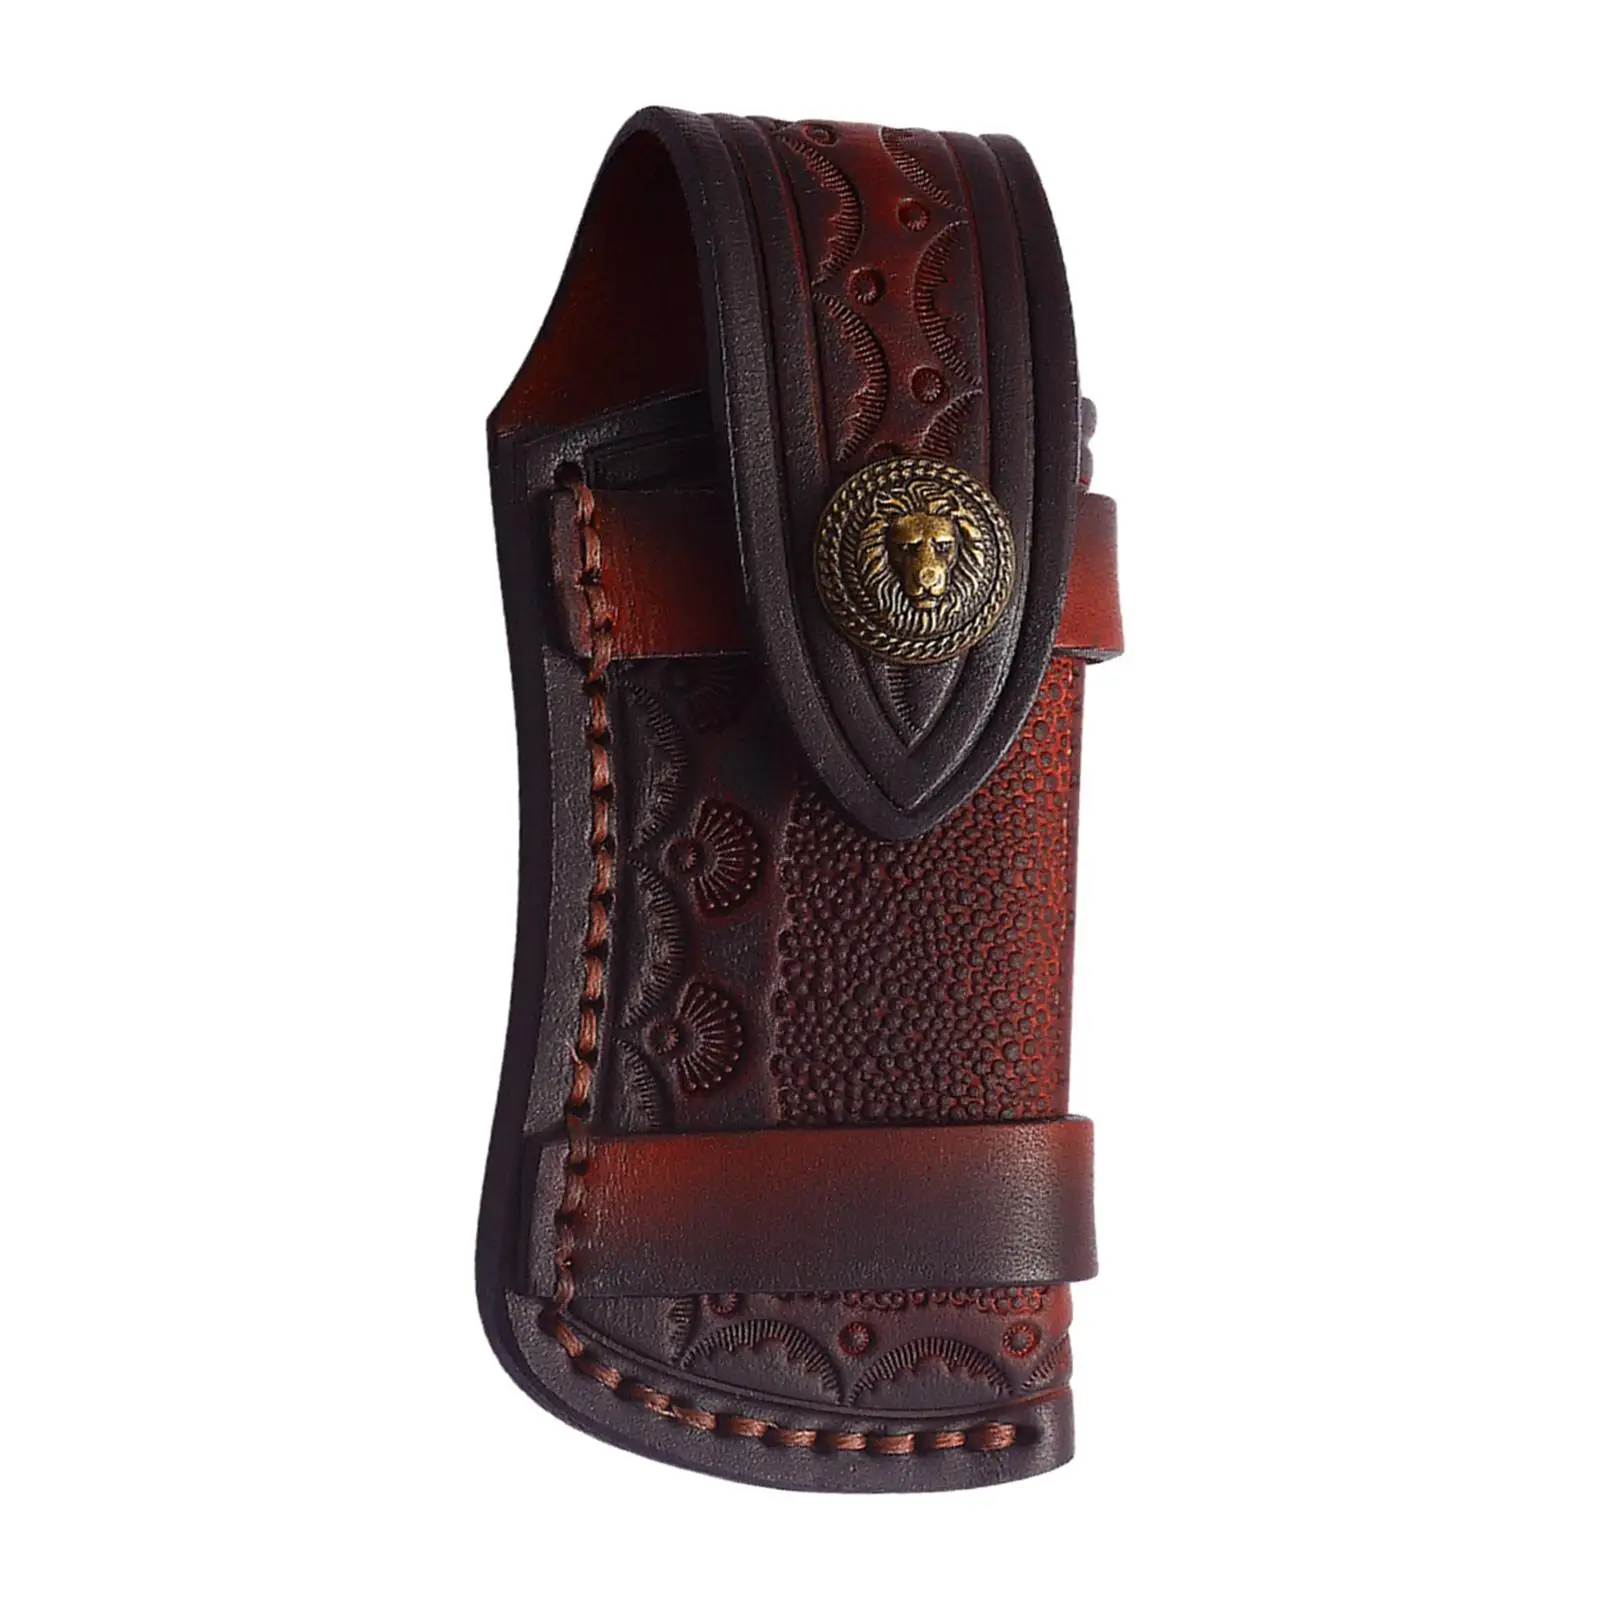 Leather Sheath for Folding Knife Protective Case Knife Pouch Knife Cover